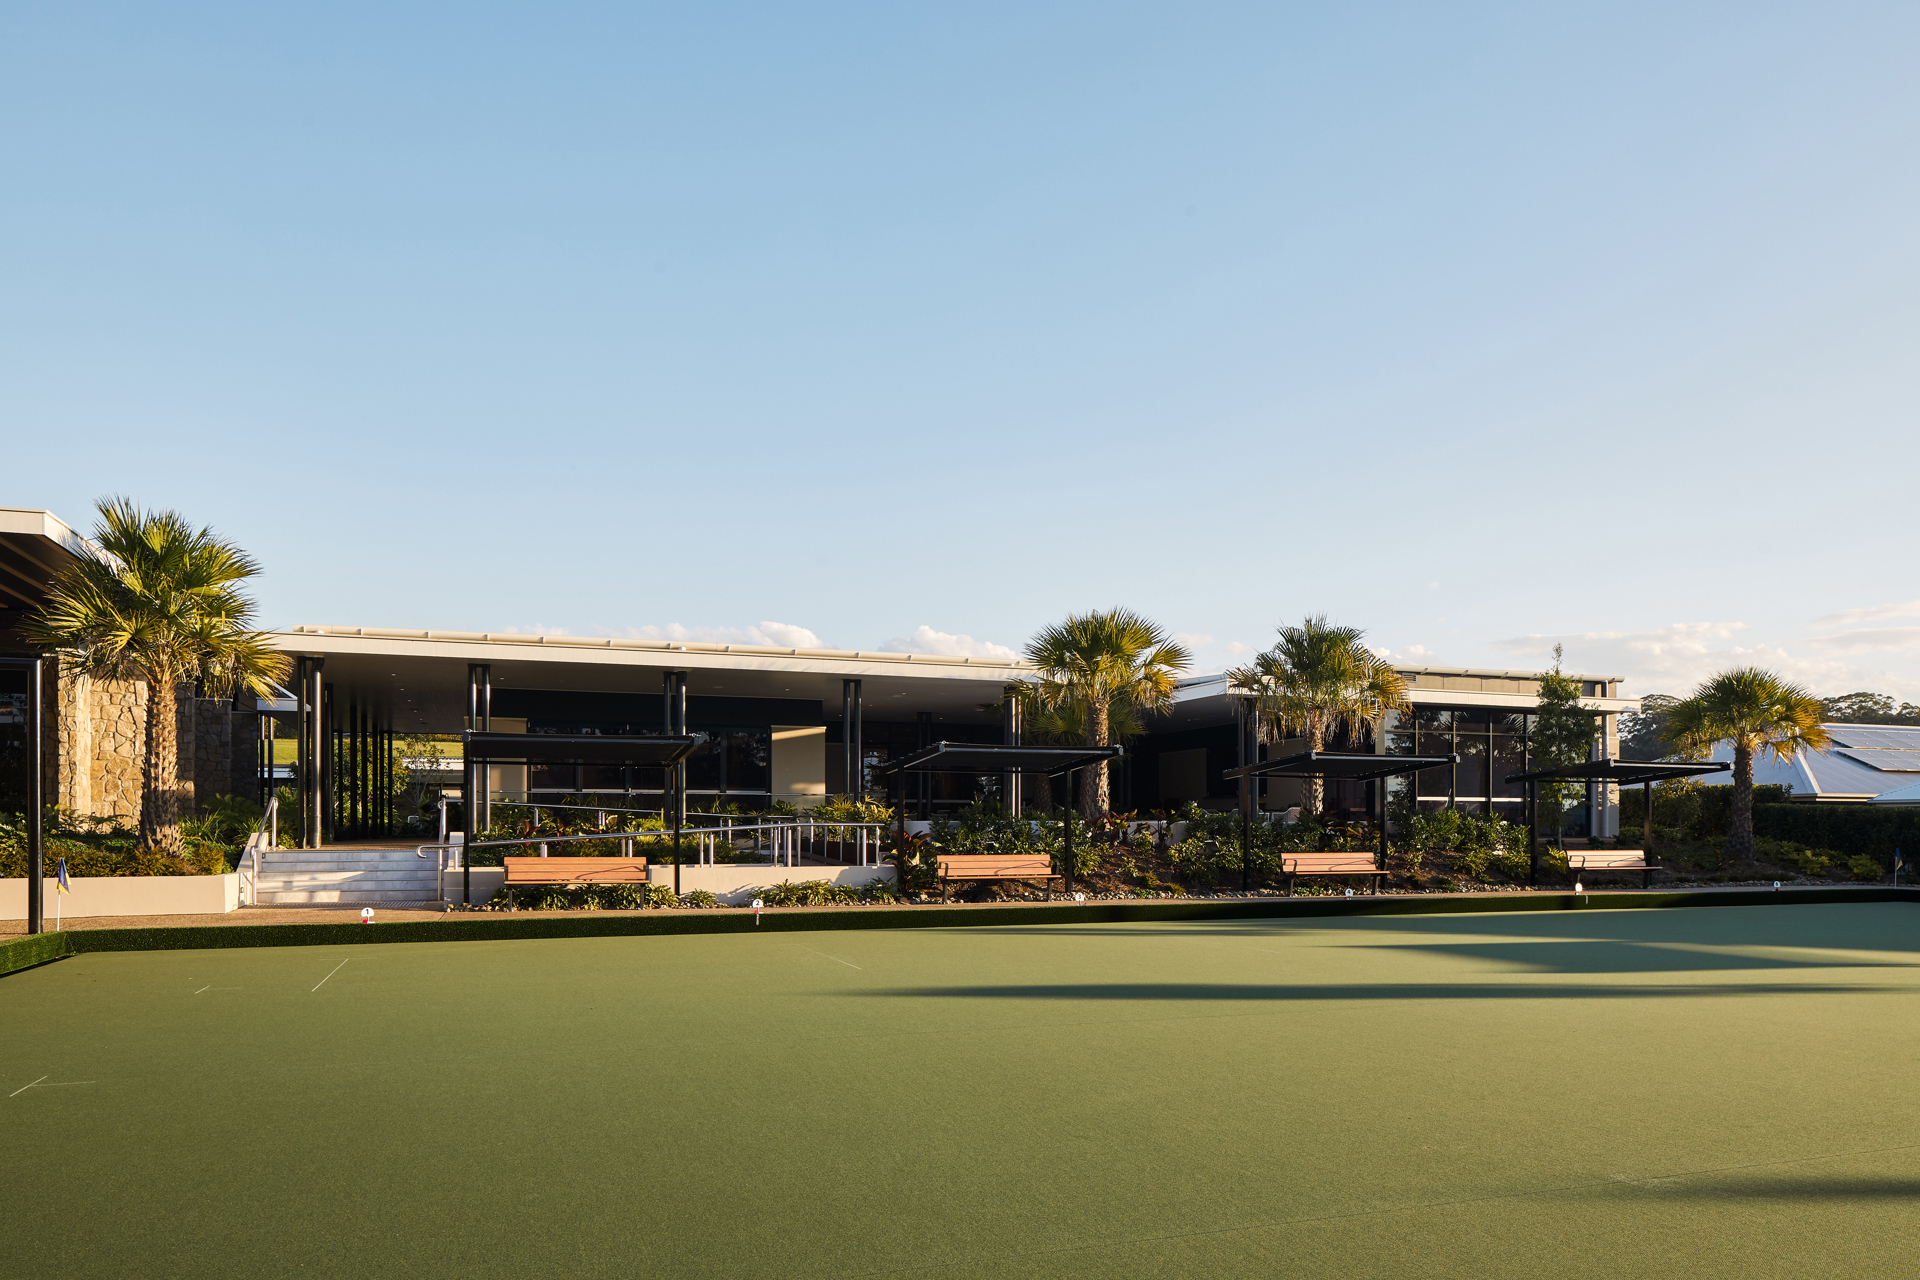 Full sized bowling green with outdoor creative arts courtyard area in B by Halcyon over 50s lifestyle living community on the Sunshine Coast.